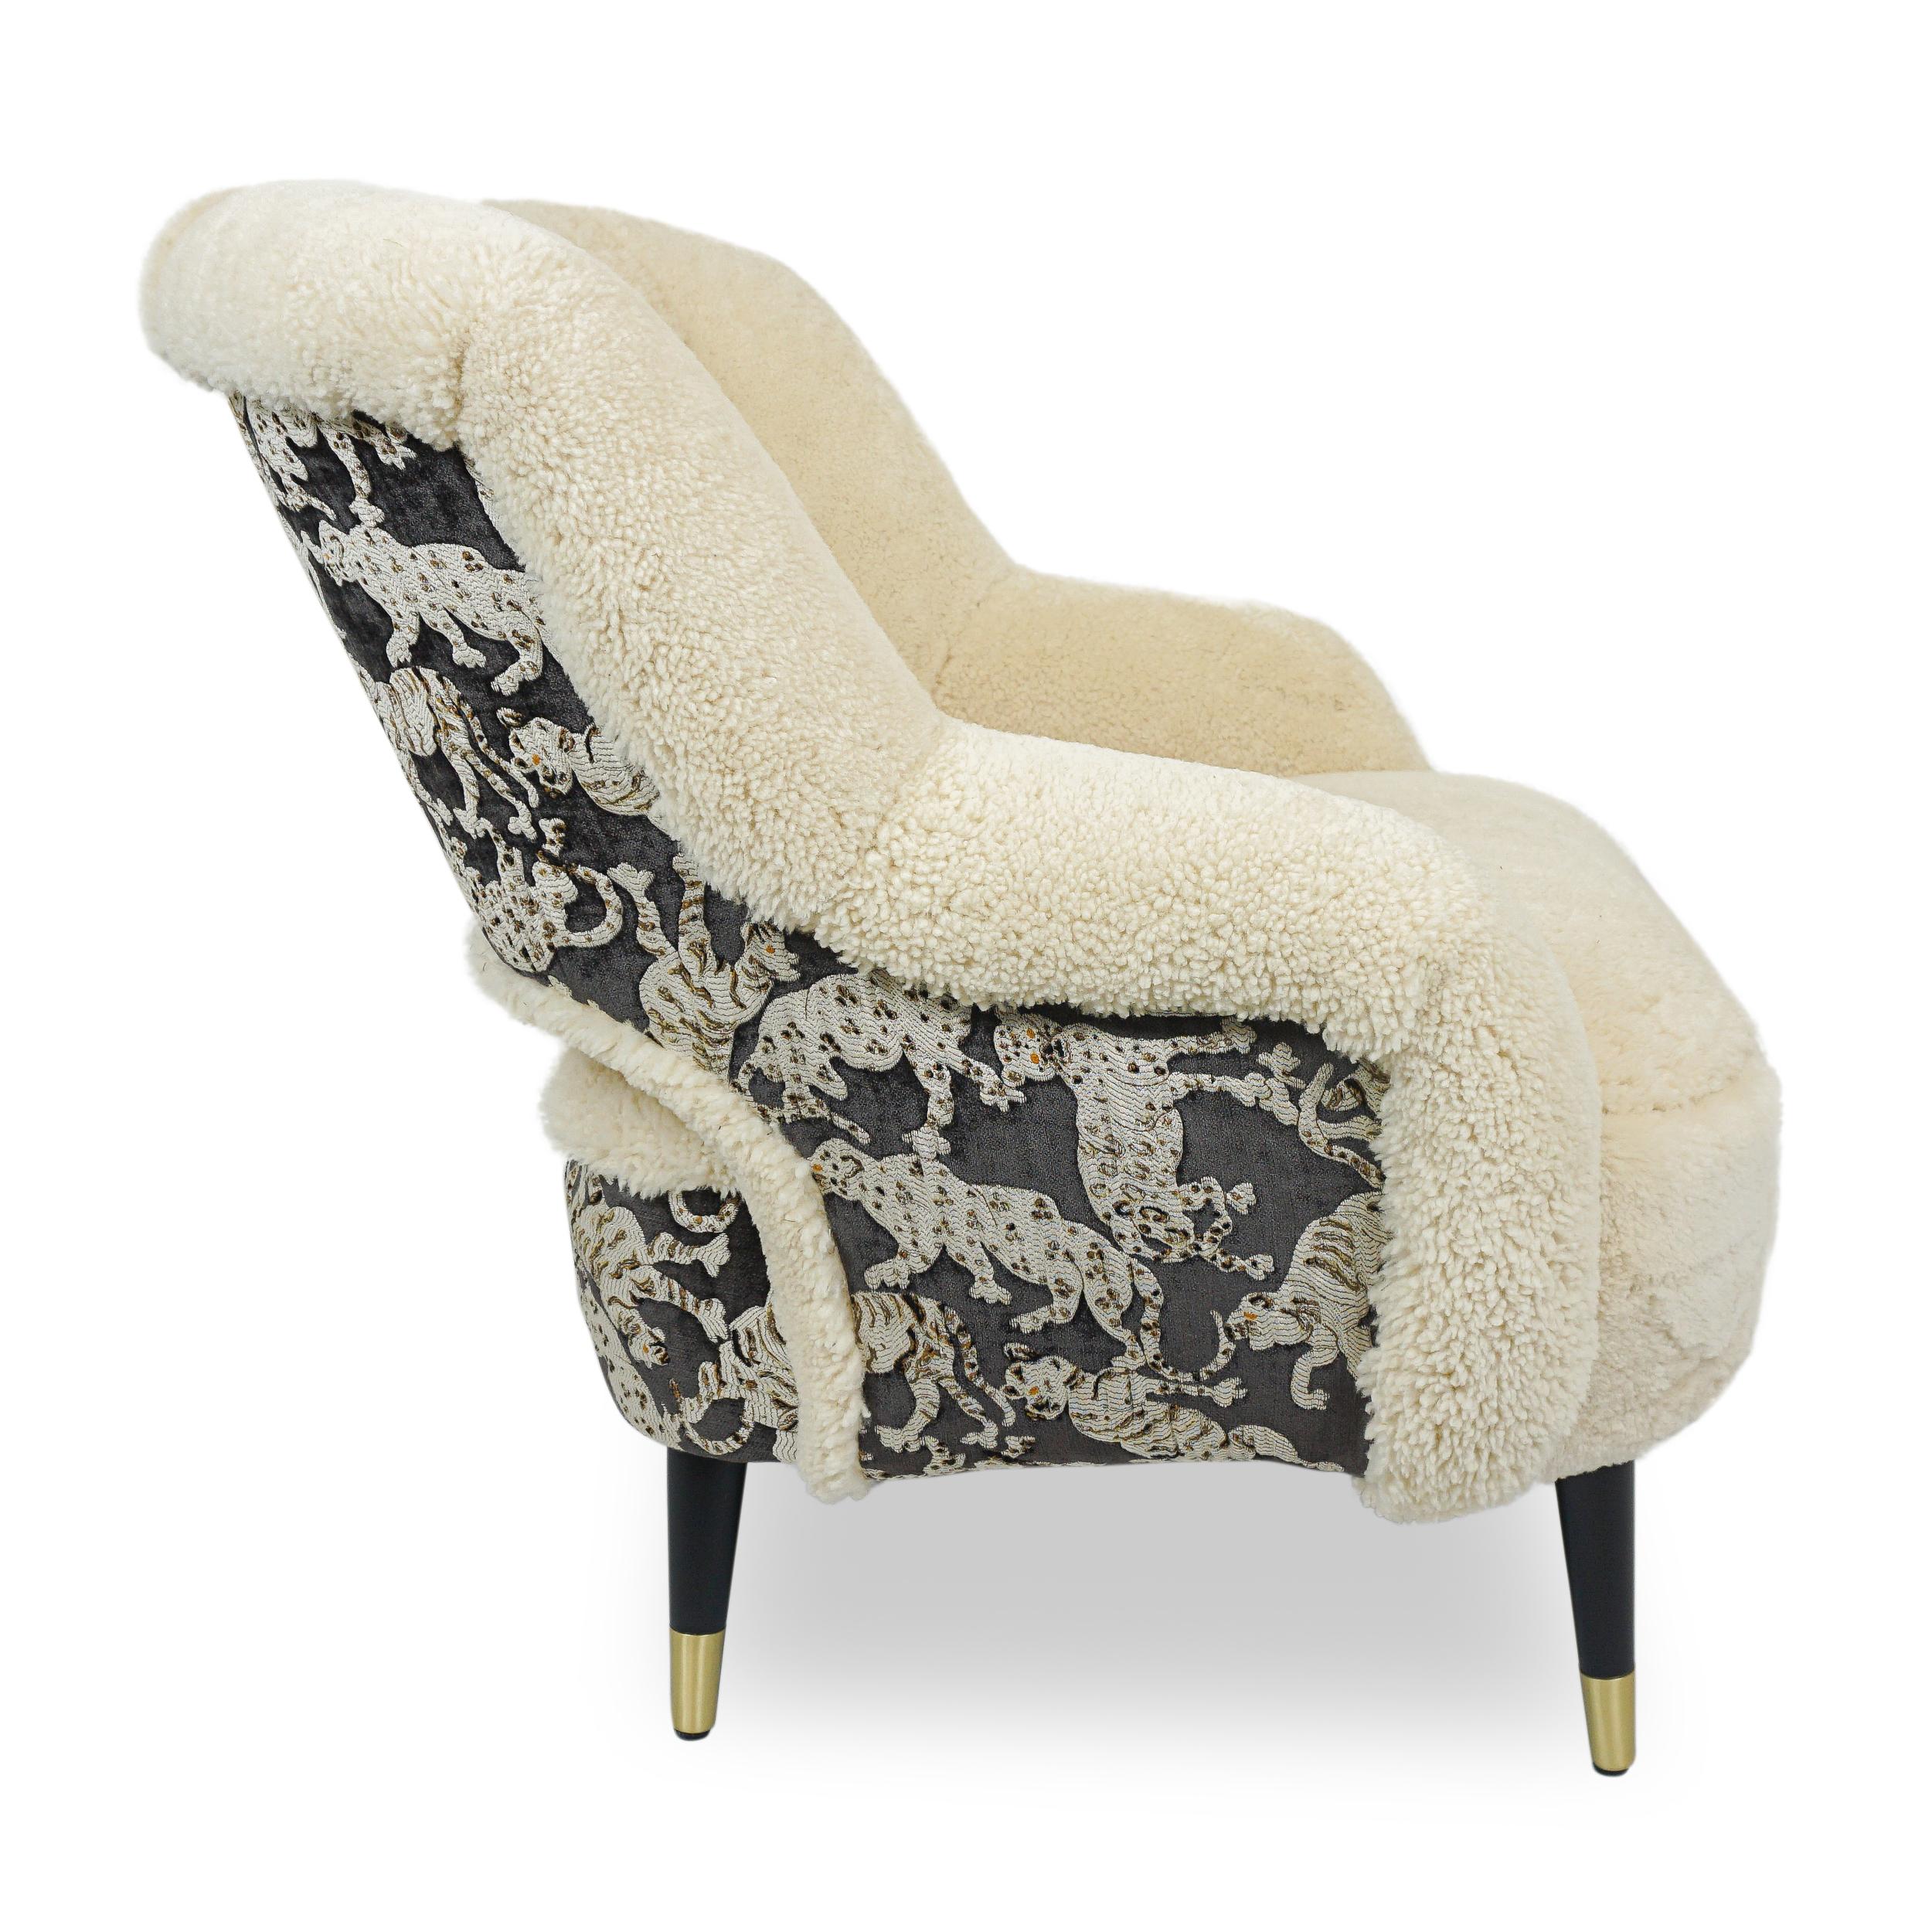 Modern Natural Shearling and Quilted Big Cat Print Club Chair with Wooden Legs In New Condition For Sale In Greenwich, CT